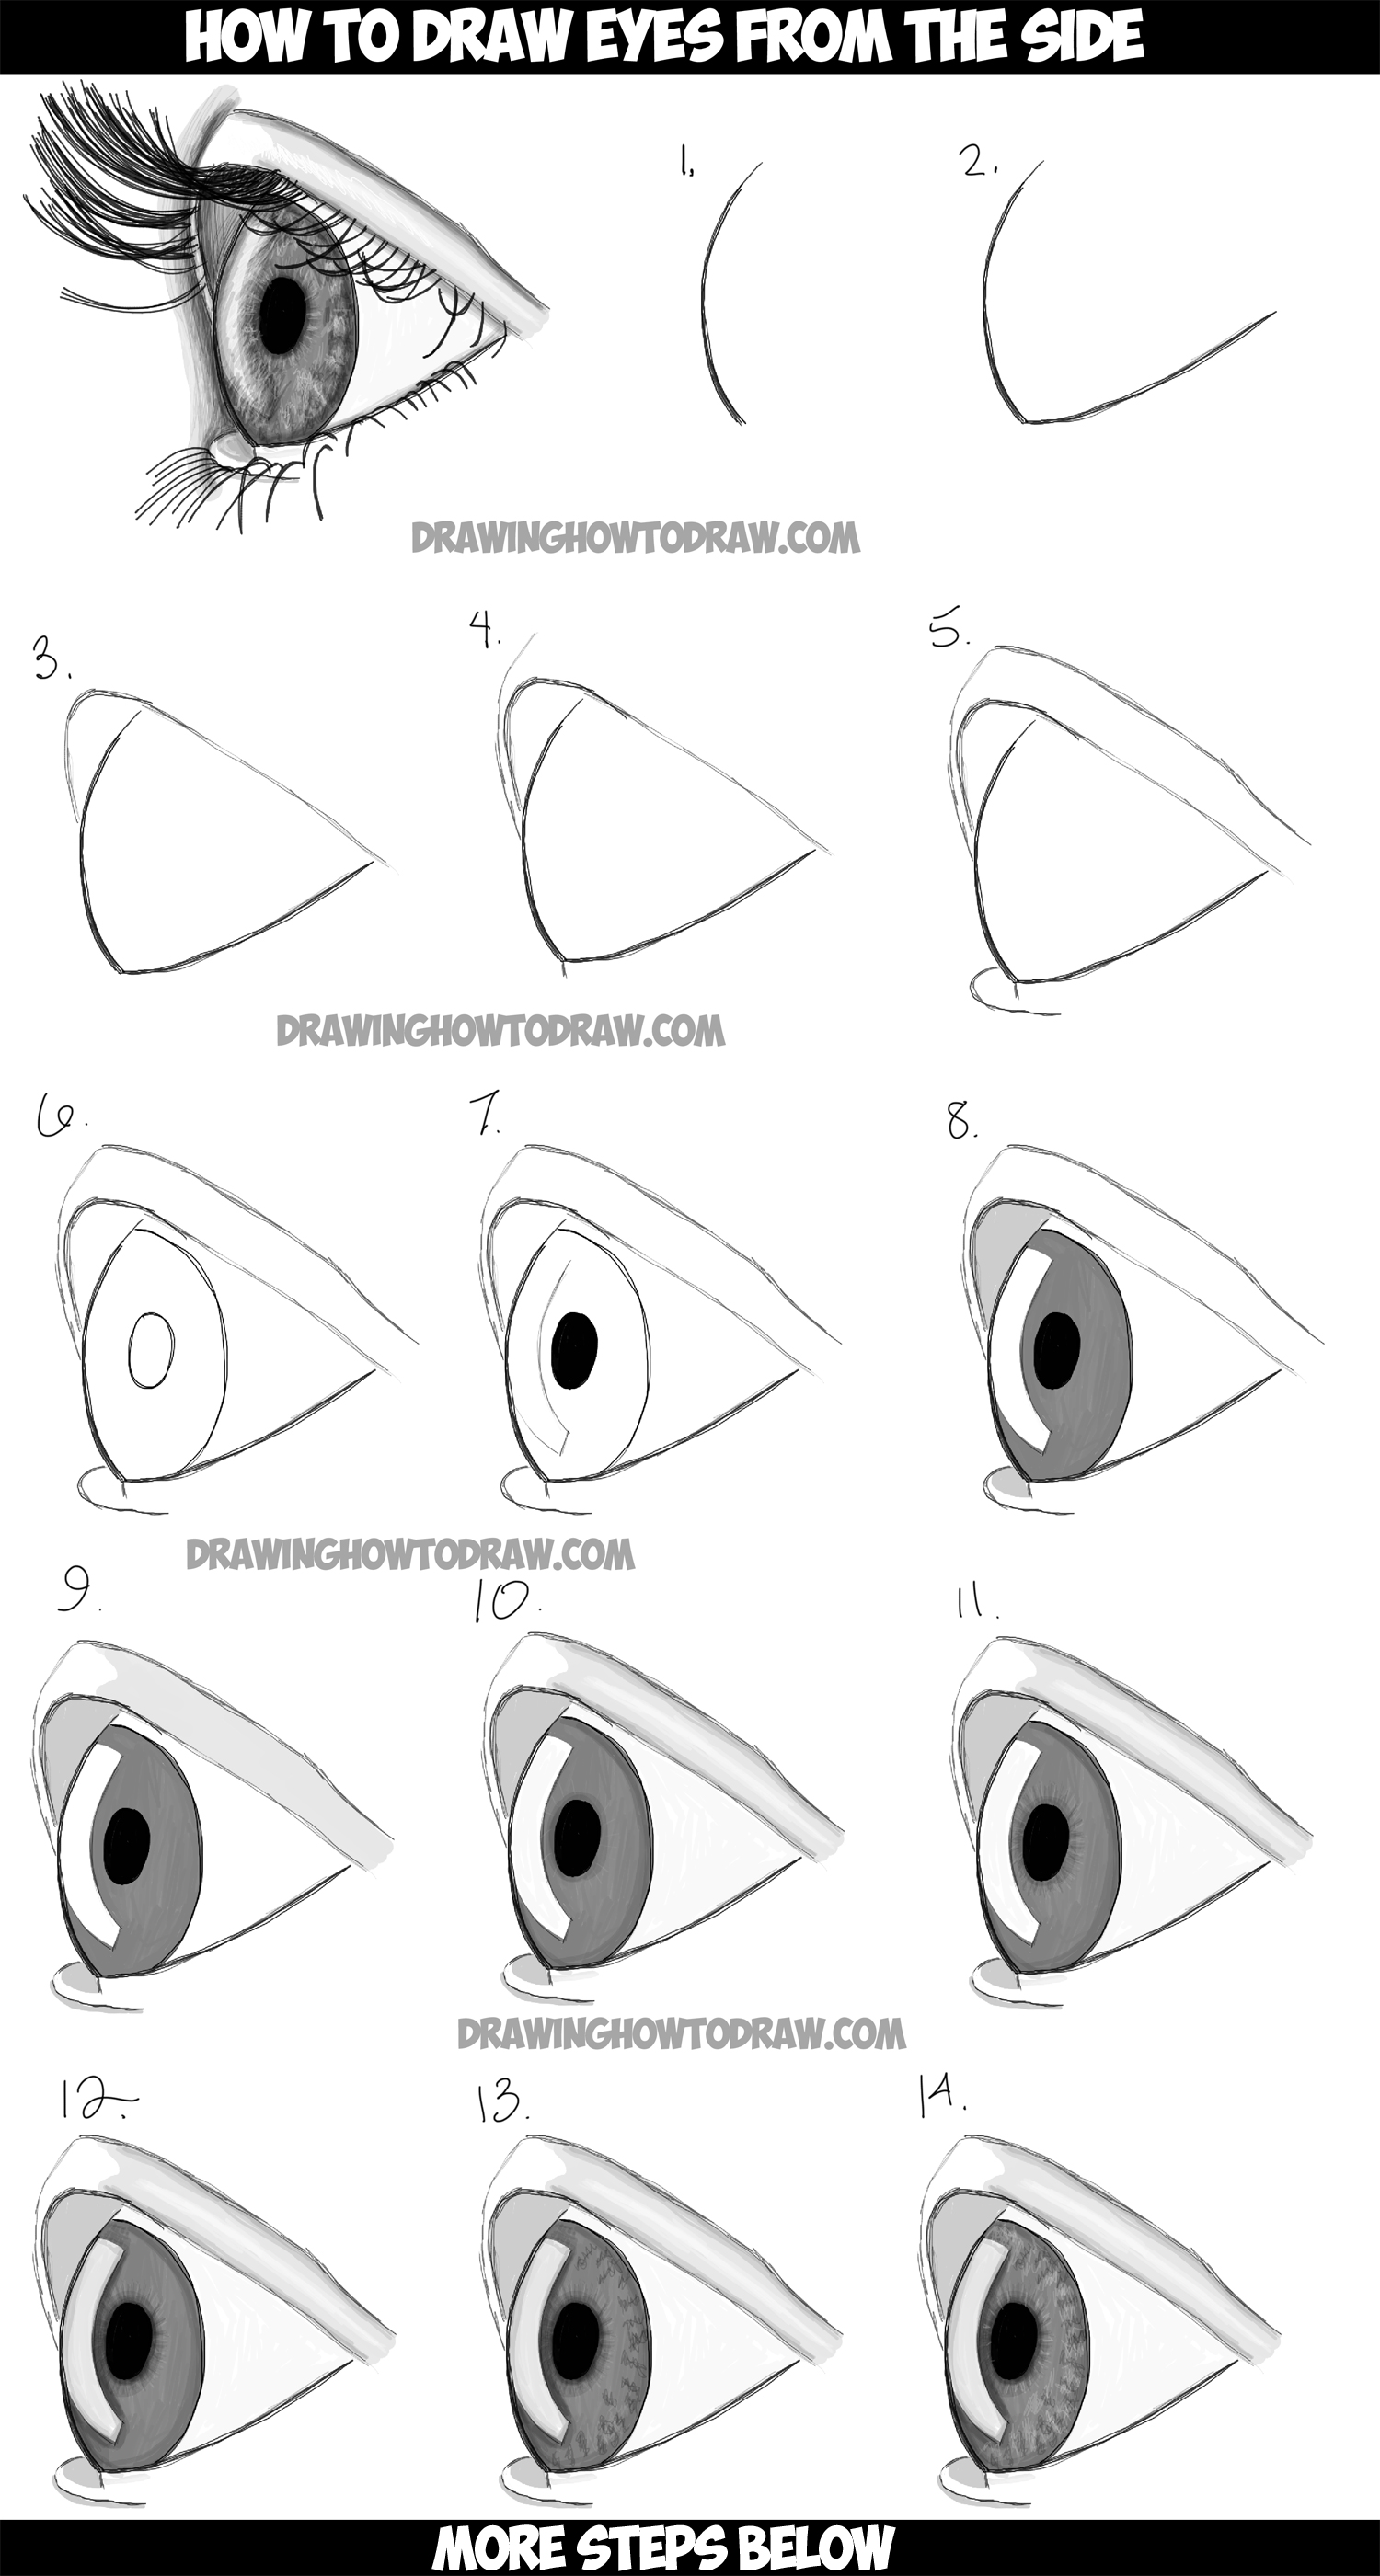 How to Draw Realistic Eyes from the Side Profile View - Step by Step